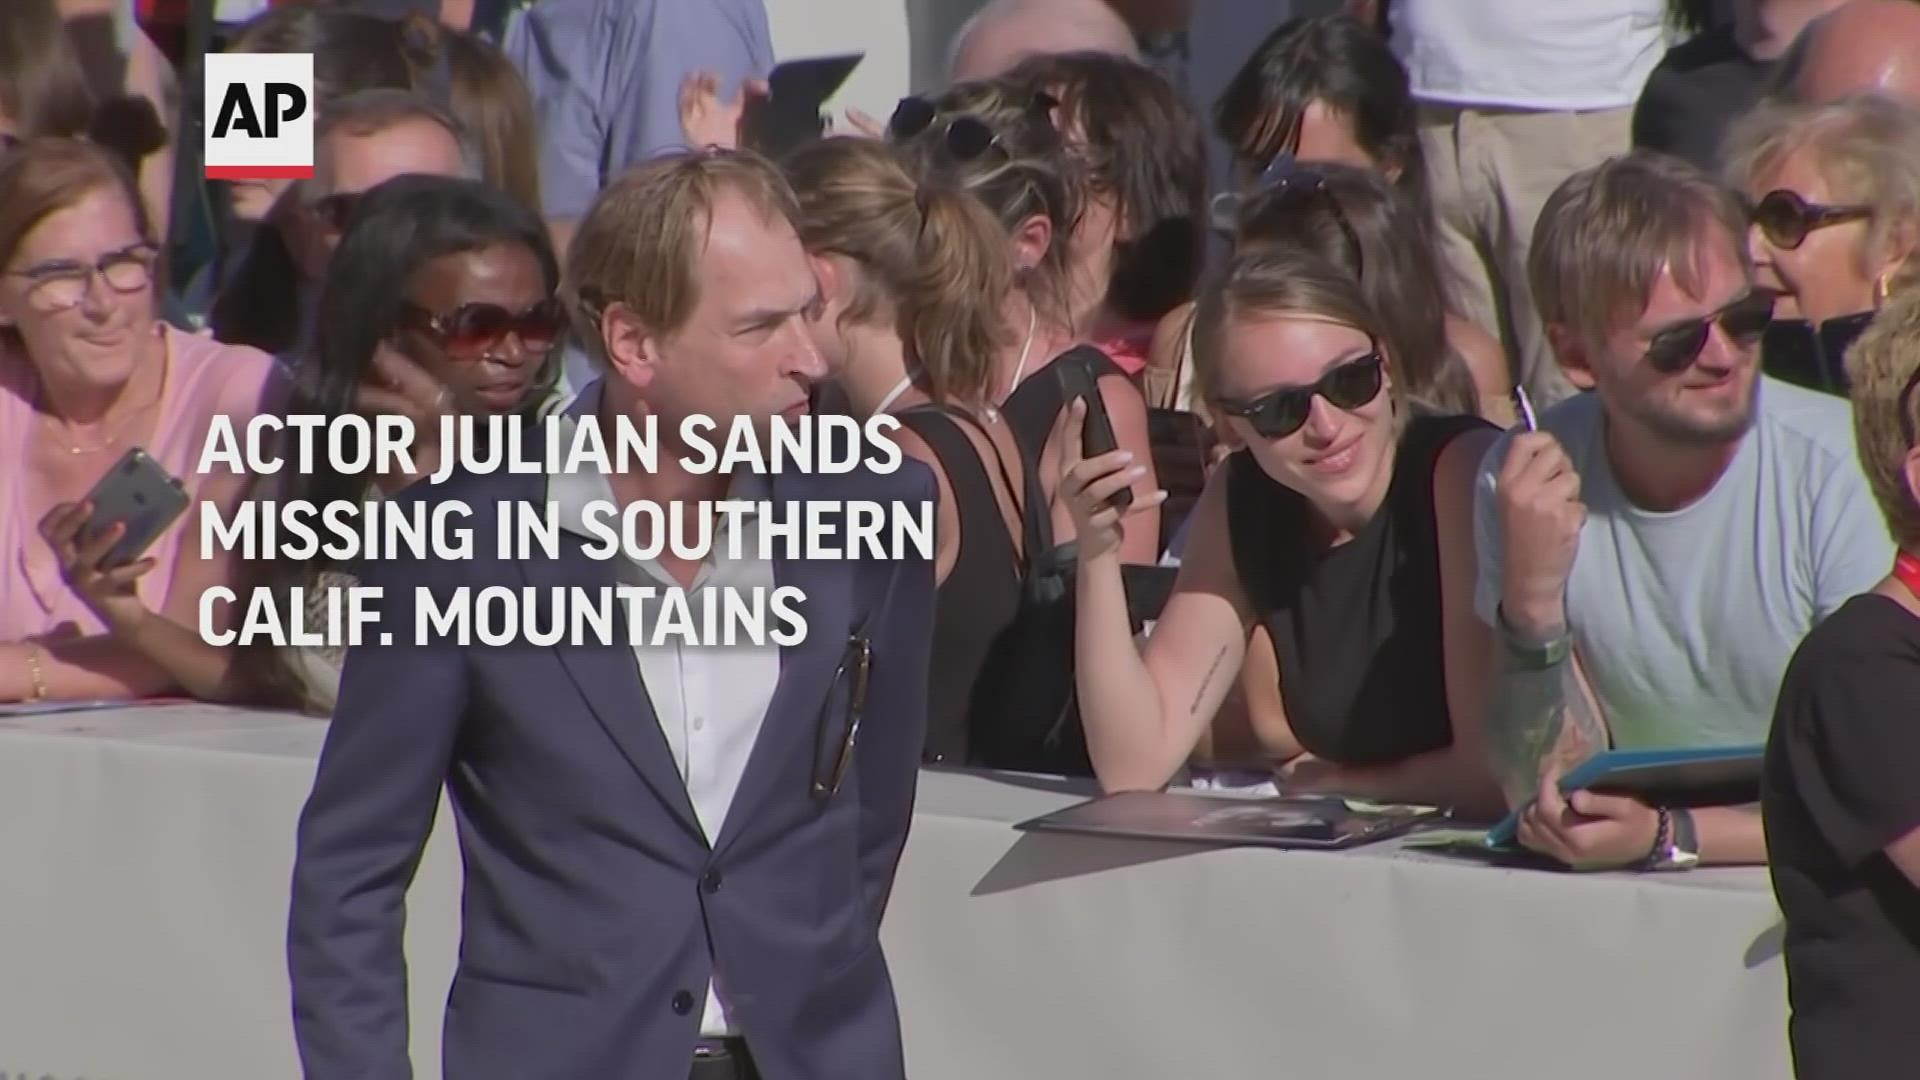 Actor Julian Sands, star of several Oscar-nominated films has been missing for five days in the Southern California mountains, authorities said Wednesday.